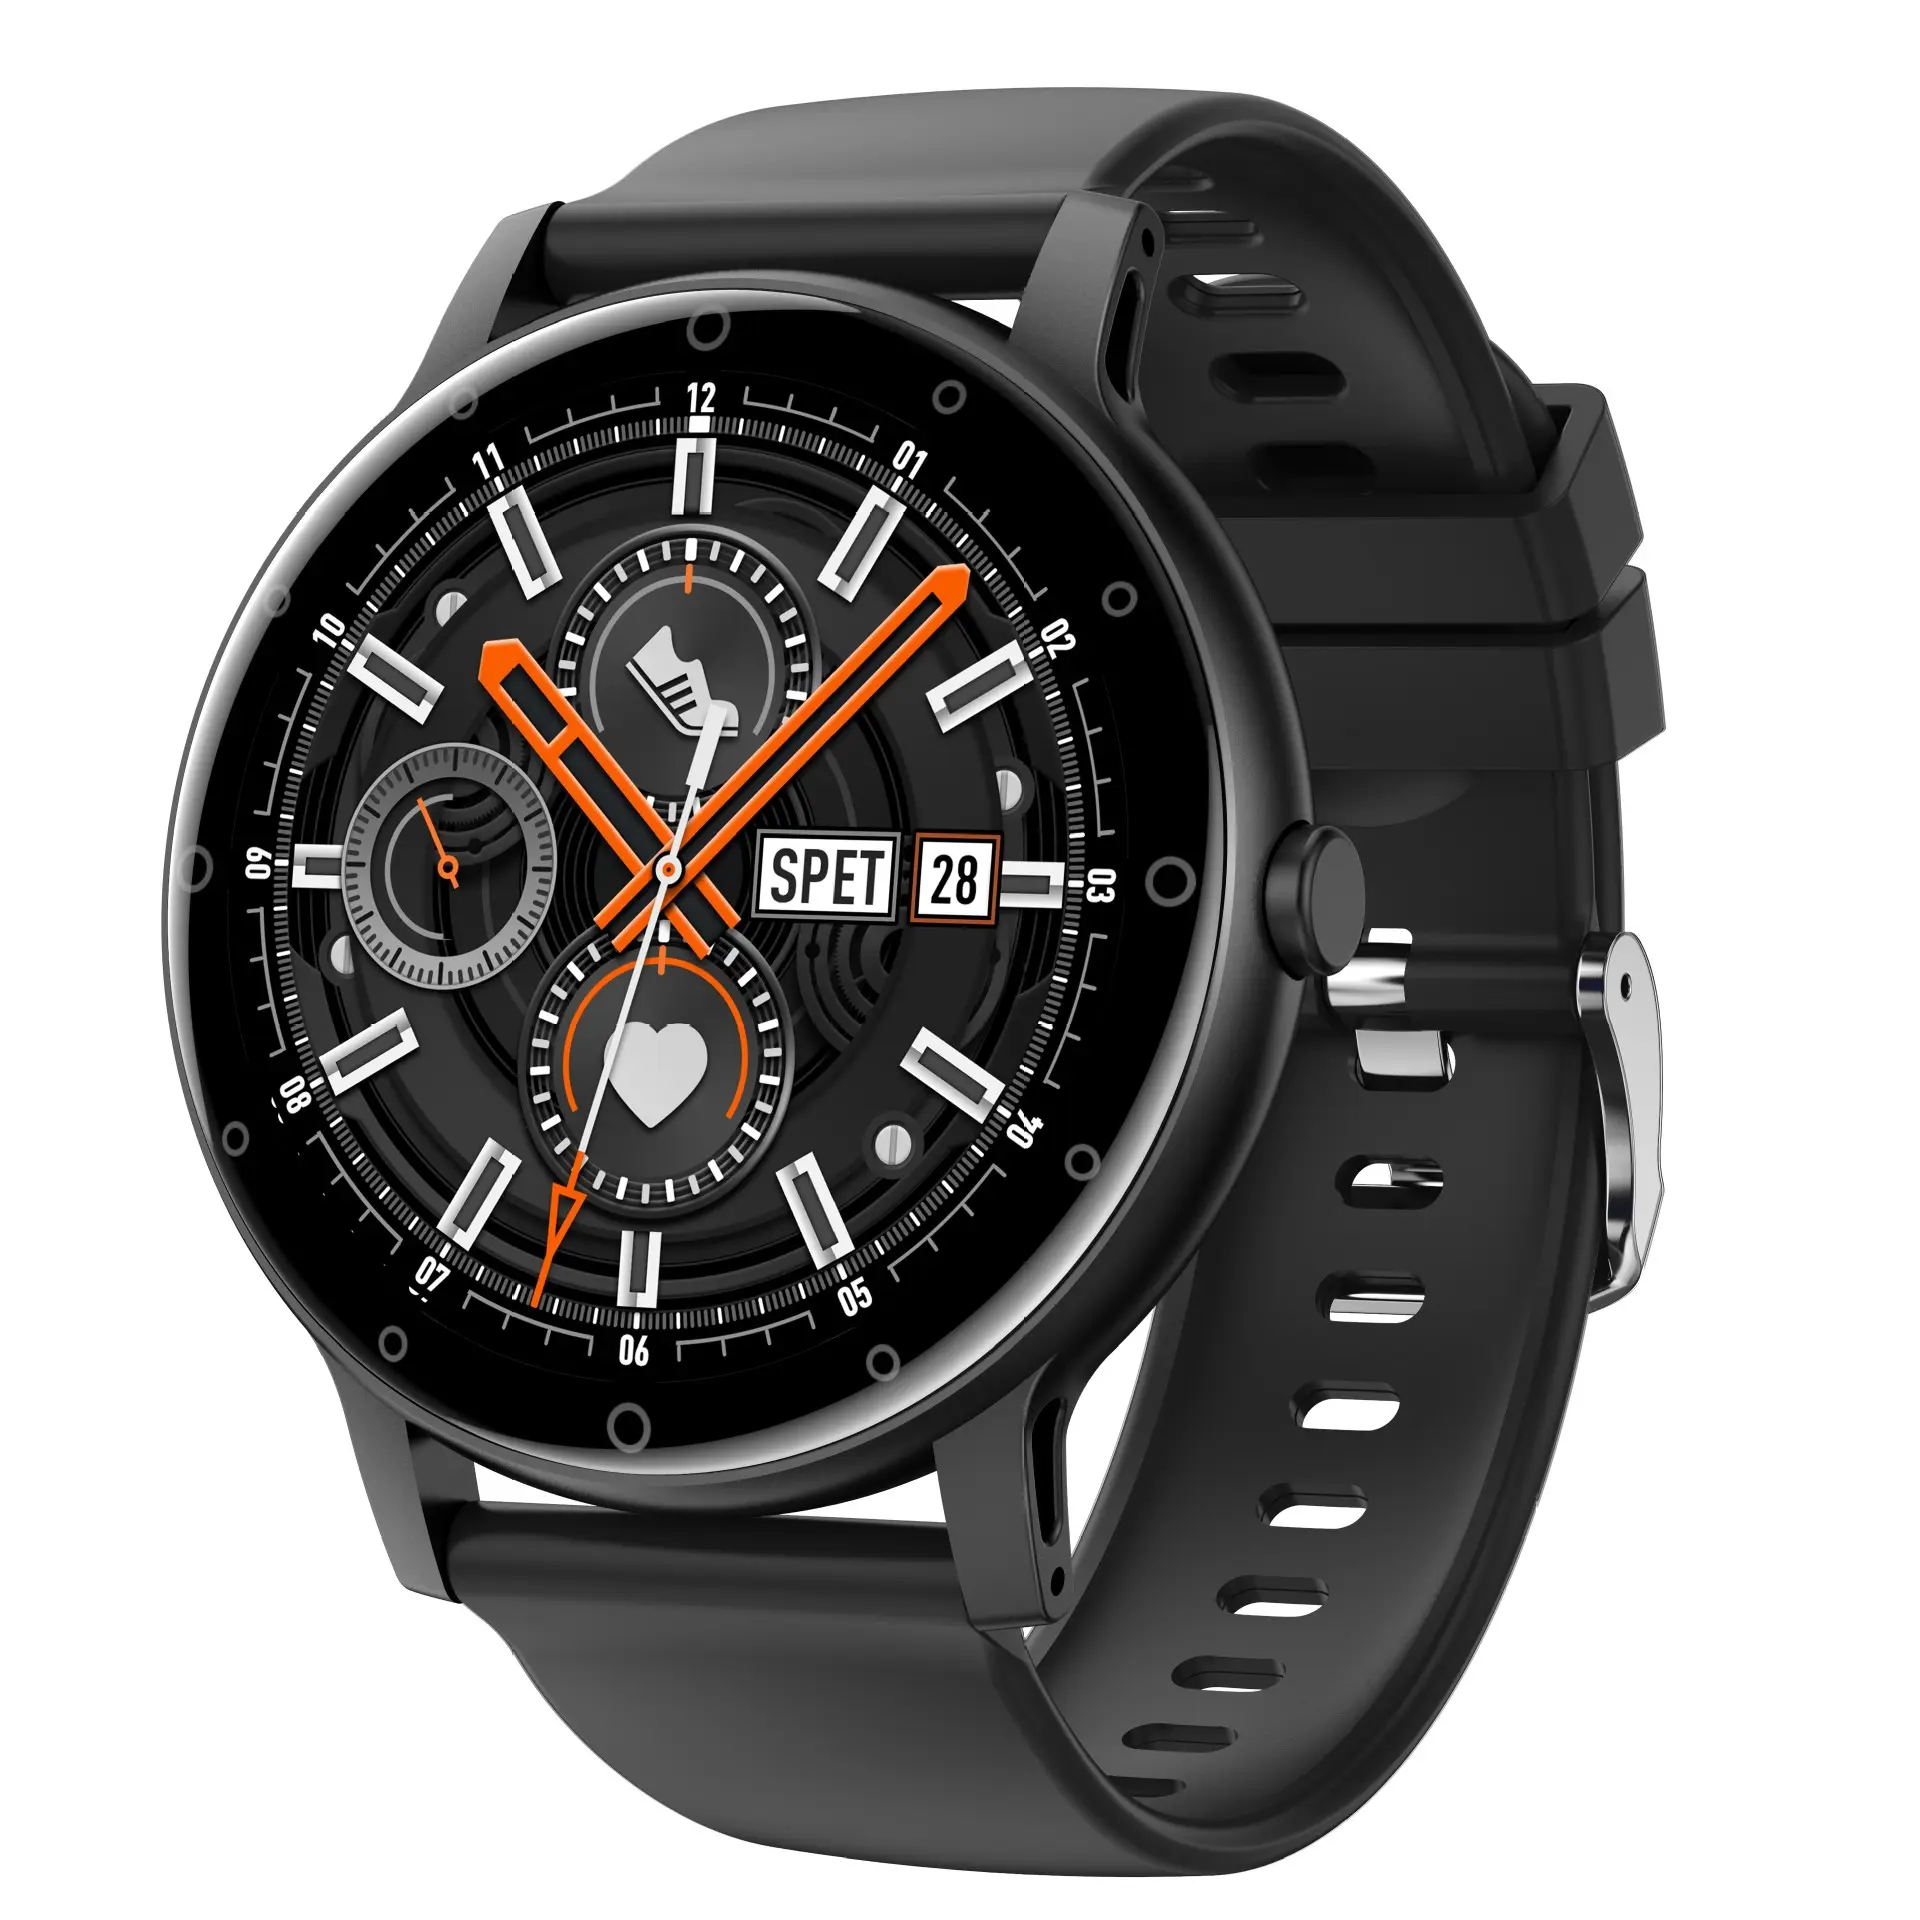 The S88 Smart Watch Calls The Sleep Monitoring Information To Remind The Sports Smart Bracelet